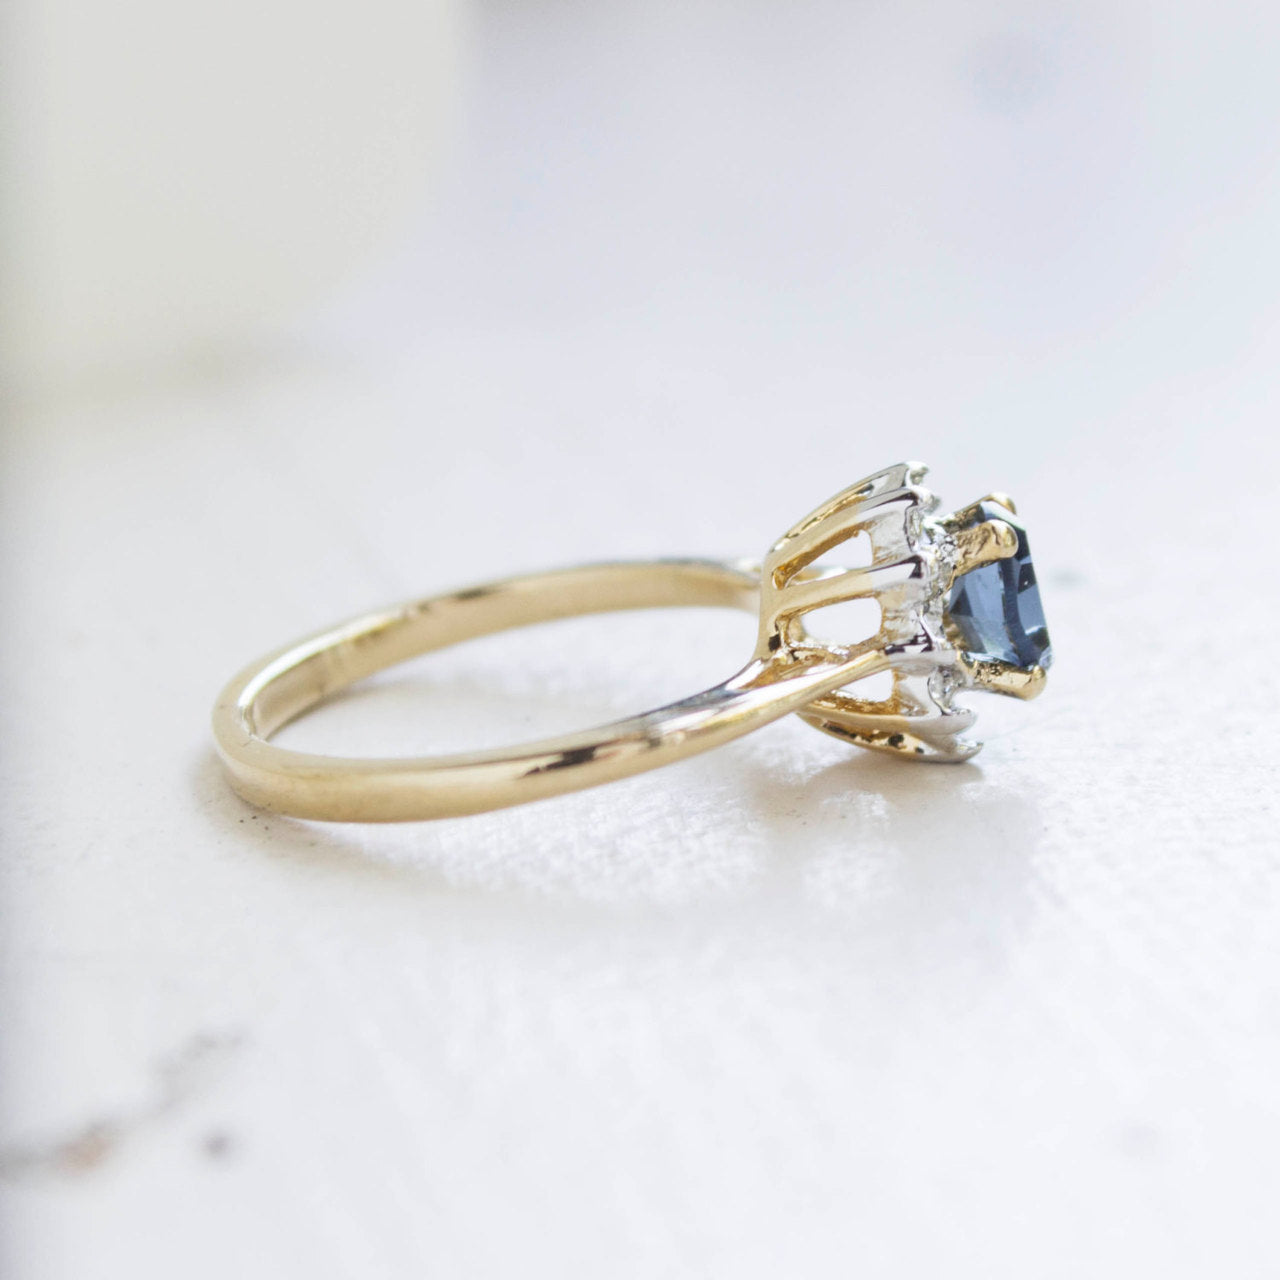 Vintage Sapphire Crystal Ring set with Clear Austrian Crystals on 18k Yellow Gold Electroplated